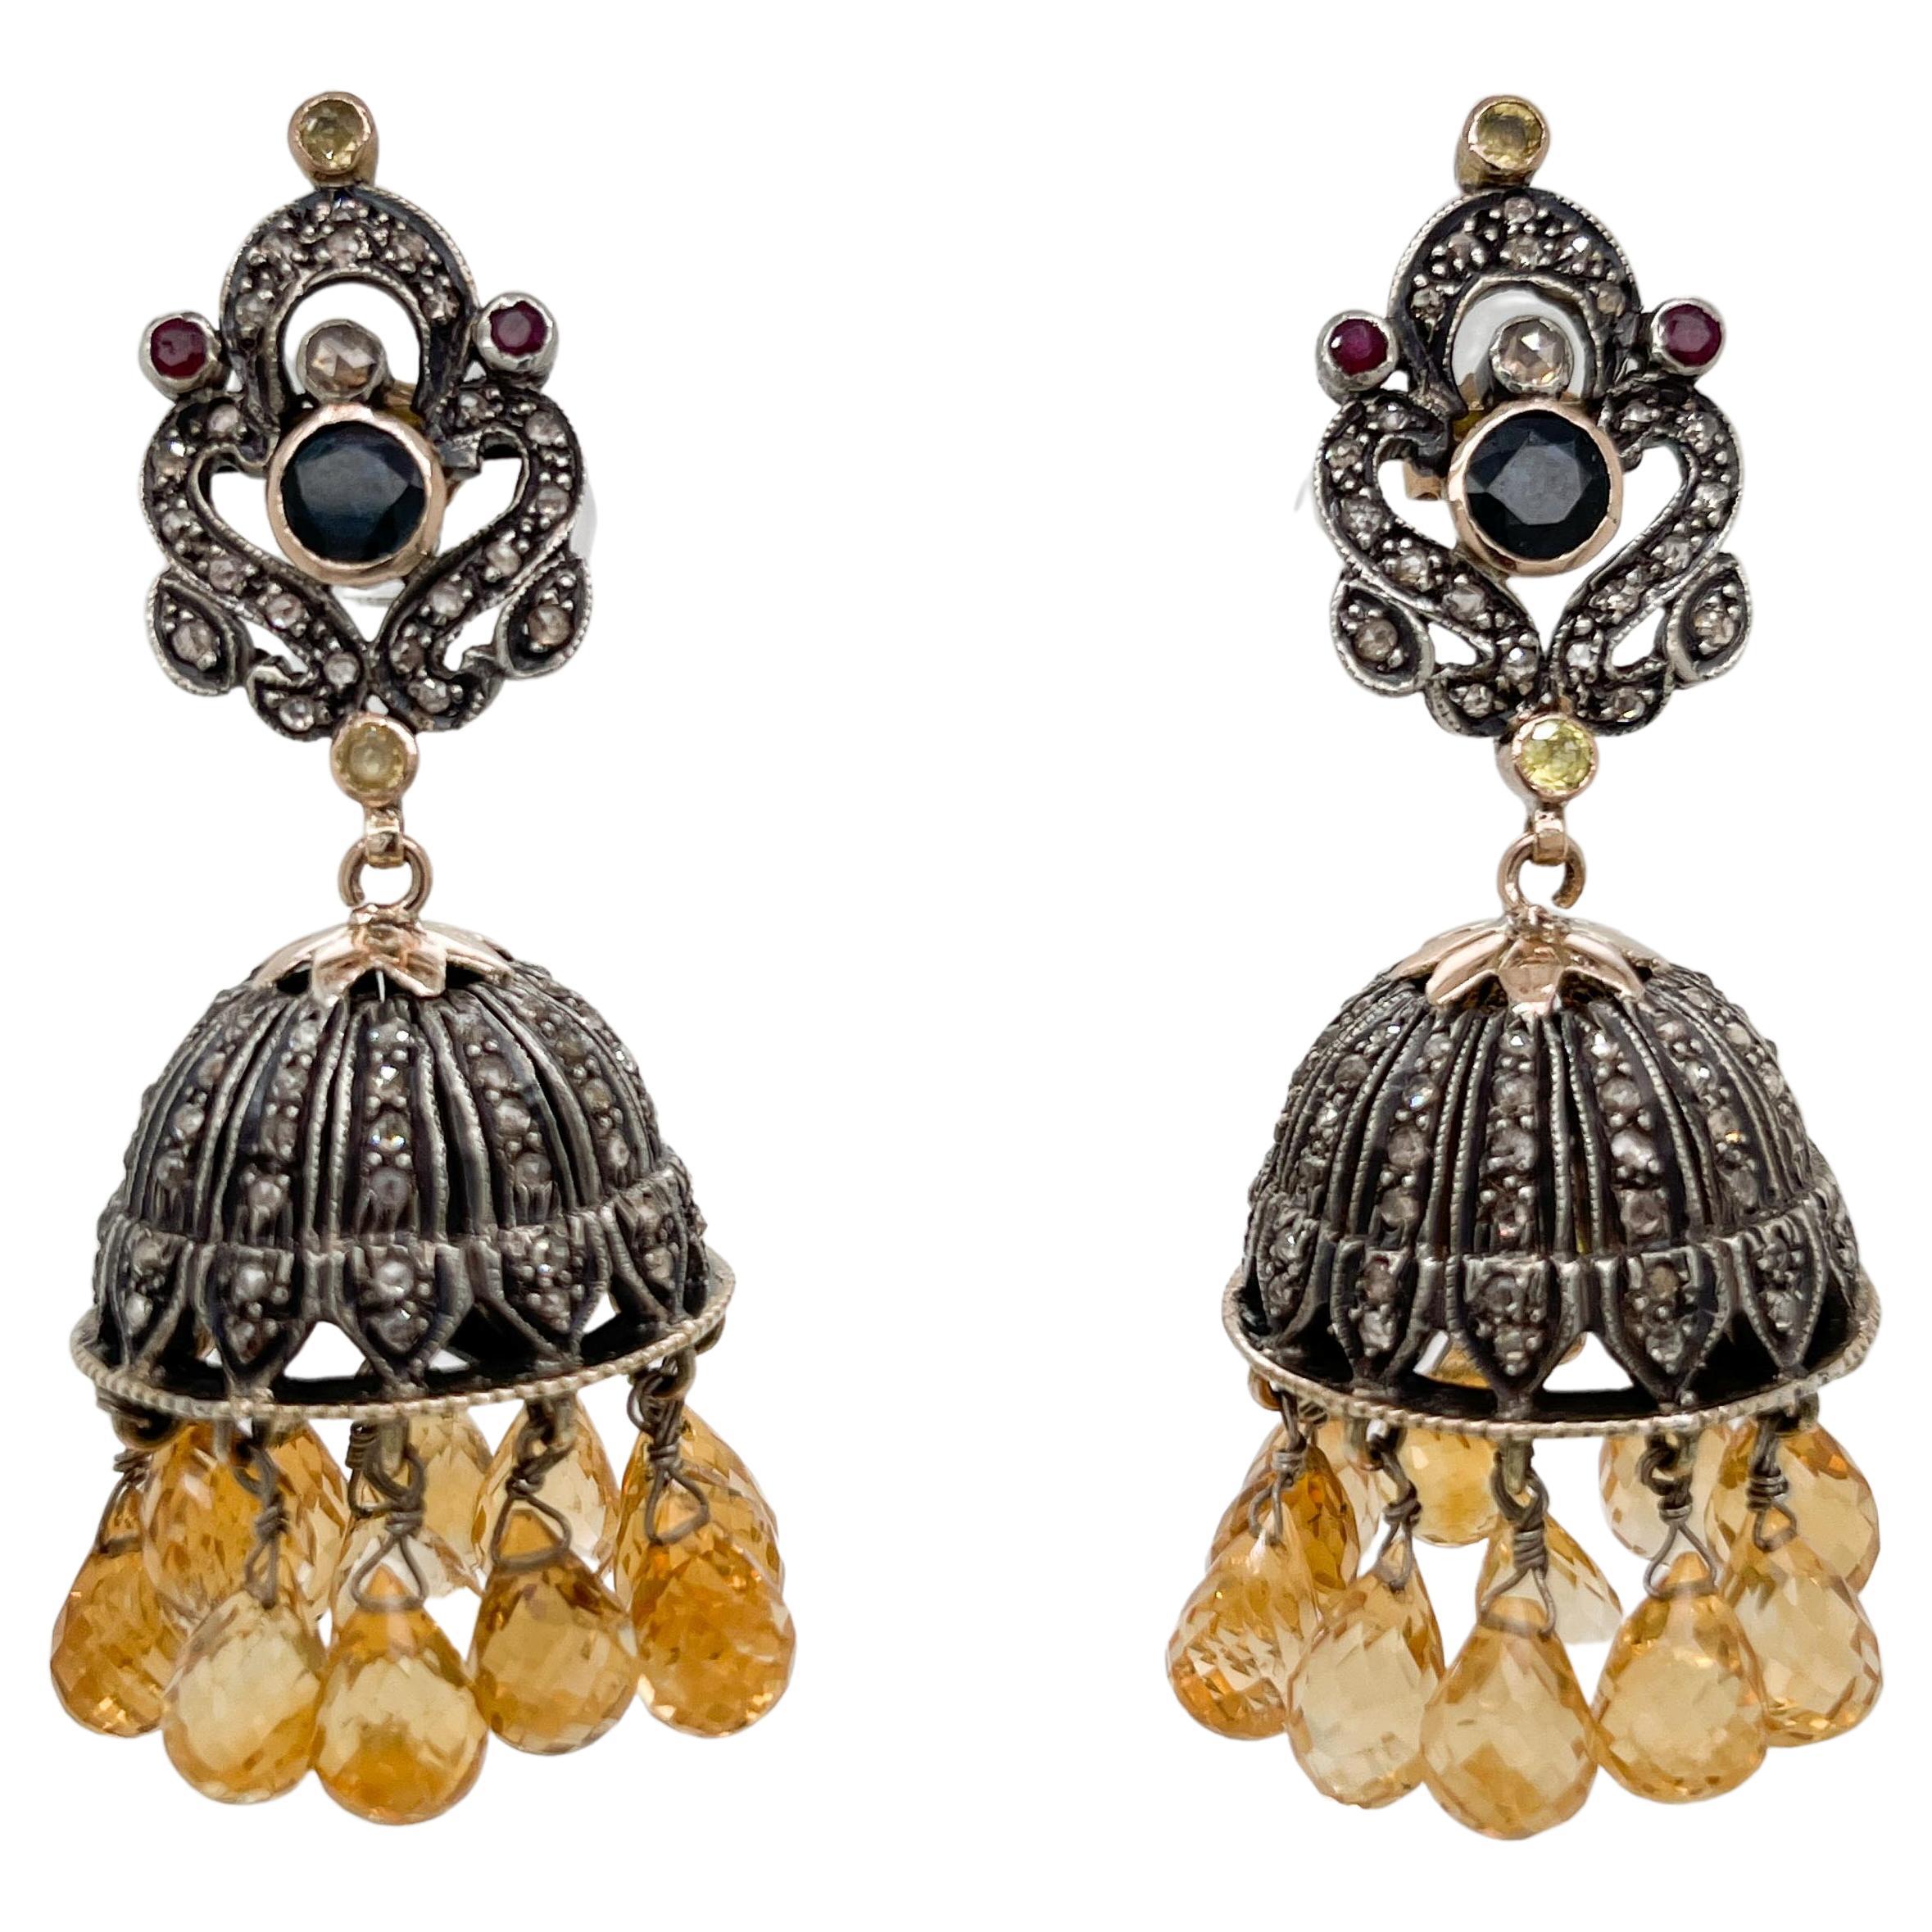 A fine pair of vintage multi-gemstone Jhumka chandelier earrings.

In 14 karat gold and sterling silver. (Posts in 14k gold).

With pave-set polki diamonds covering all surfaces of the chandelier, tube-set rubies, citrines, and sapphires, and